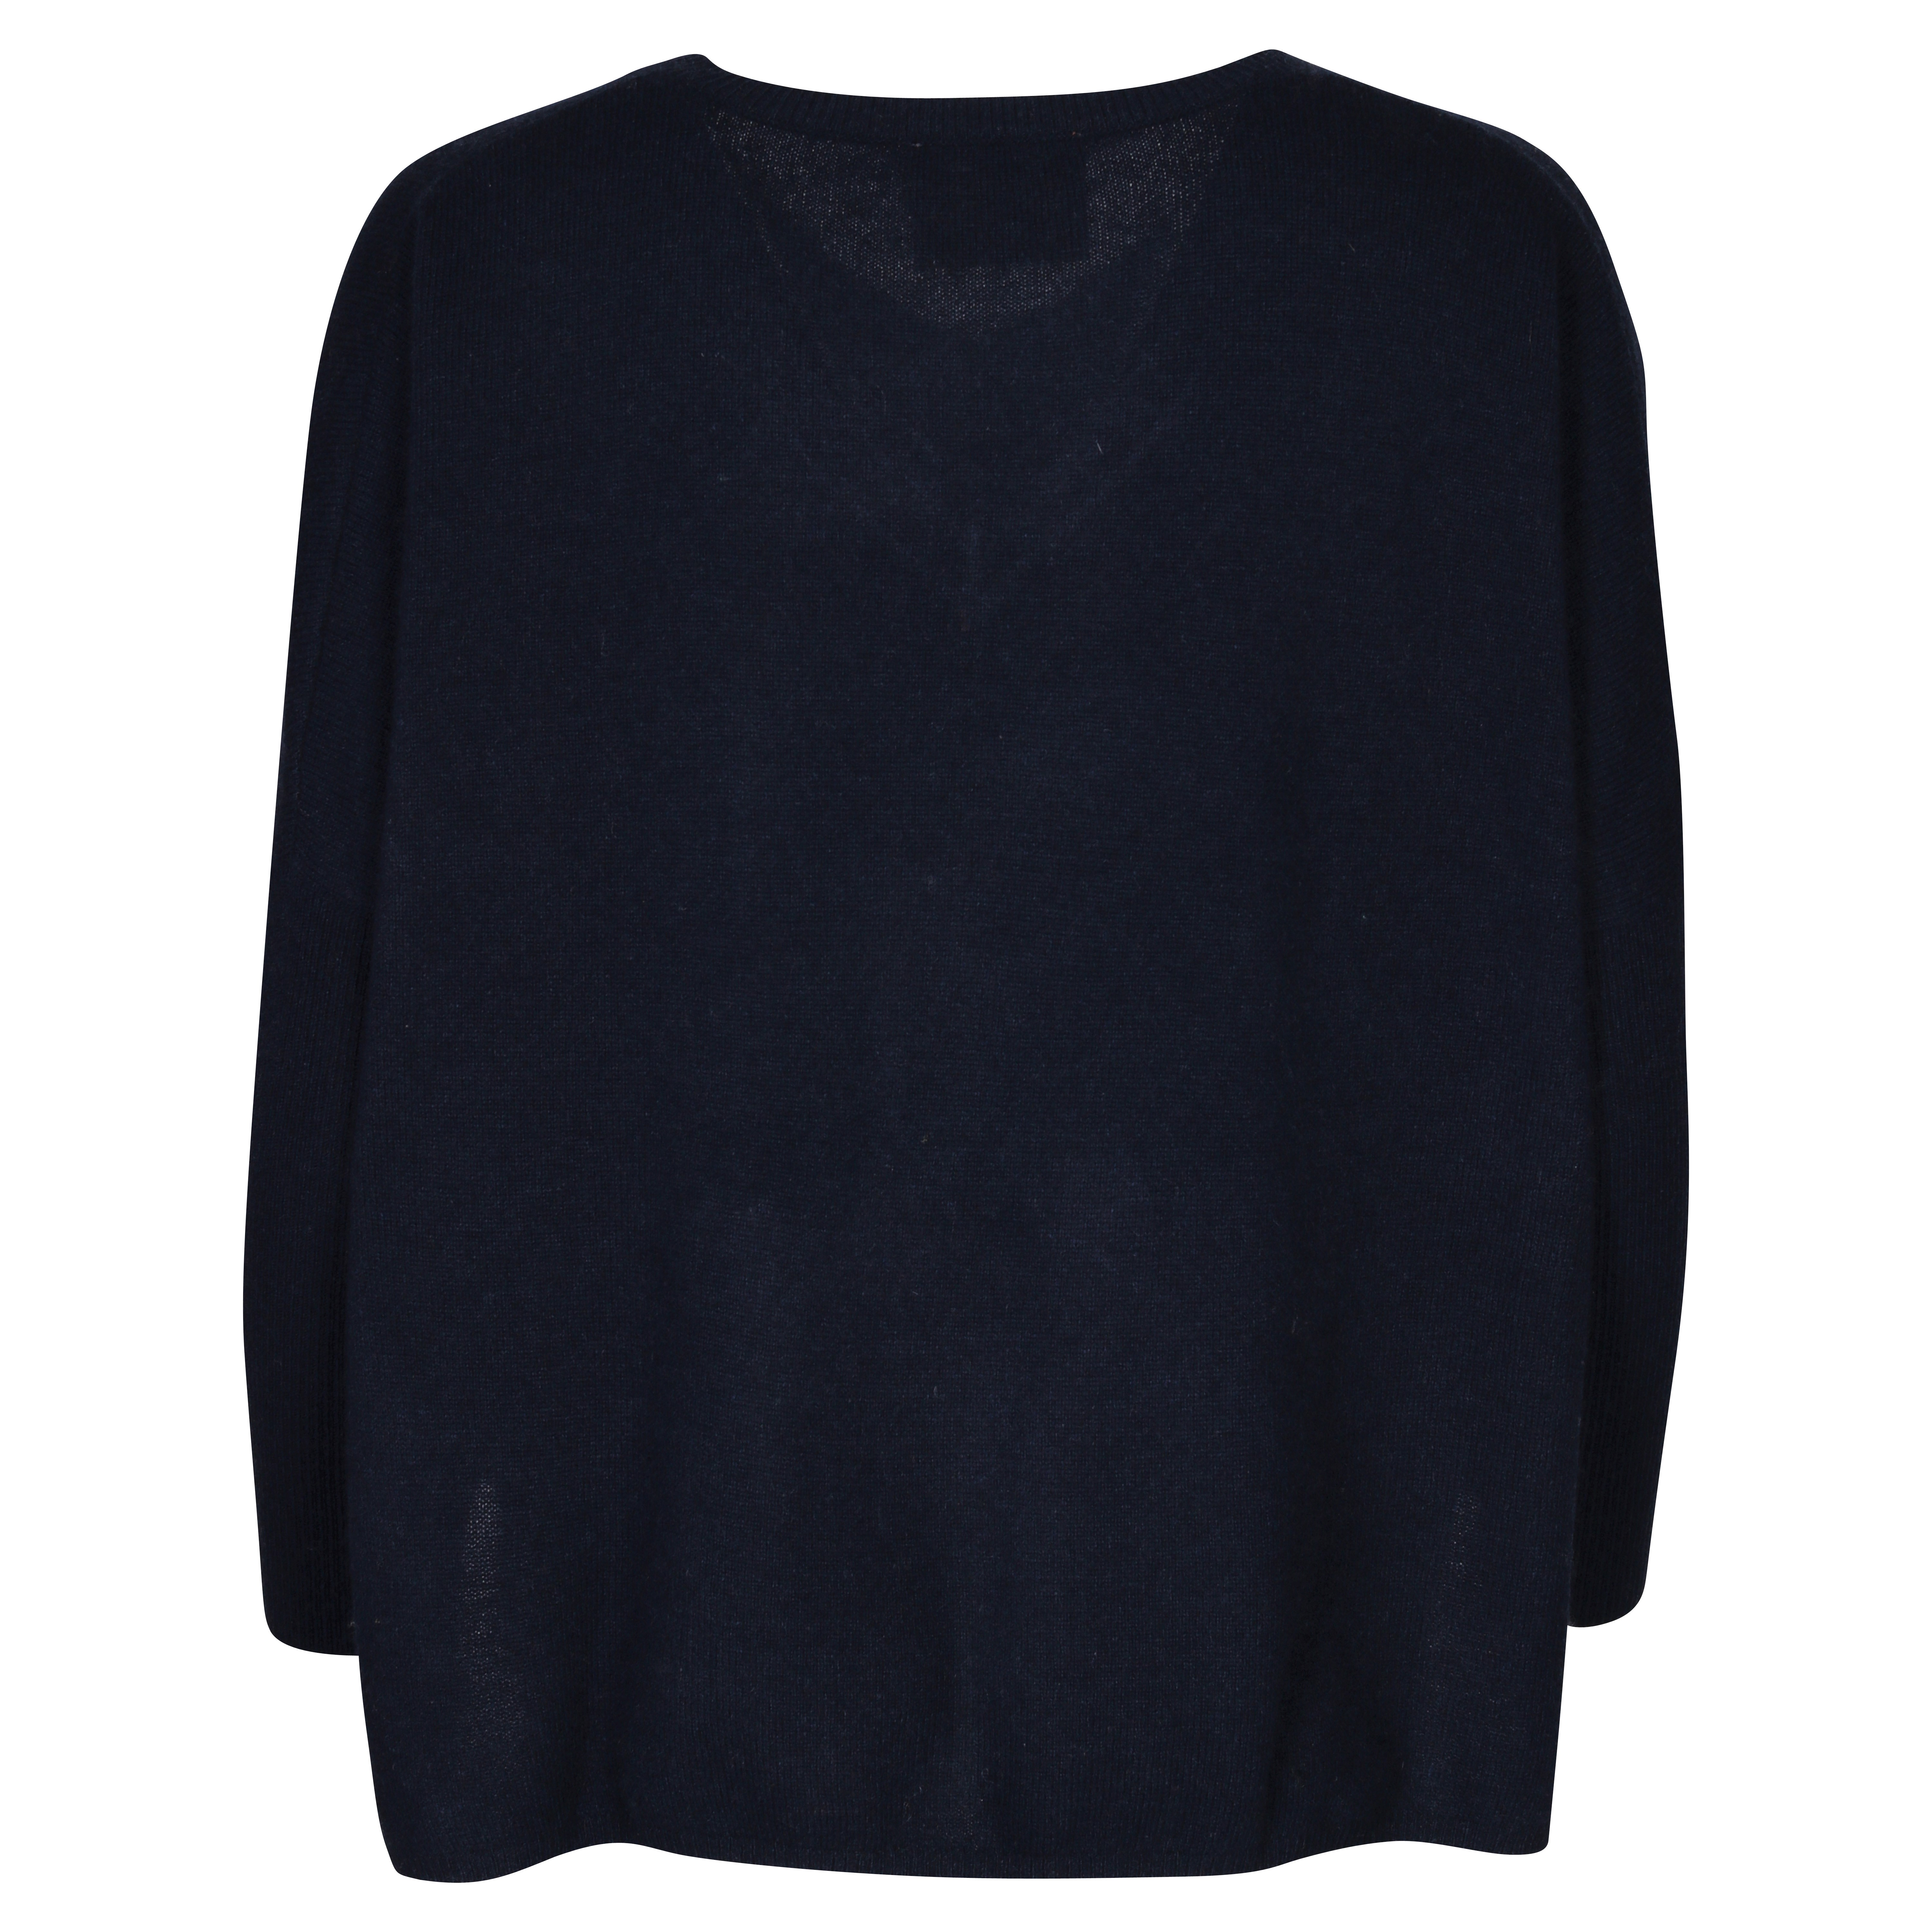 Absolut Cashmere Poncho Sweater in Navy S